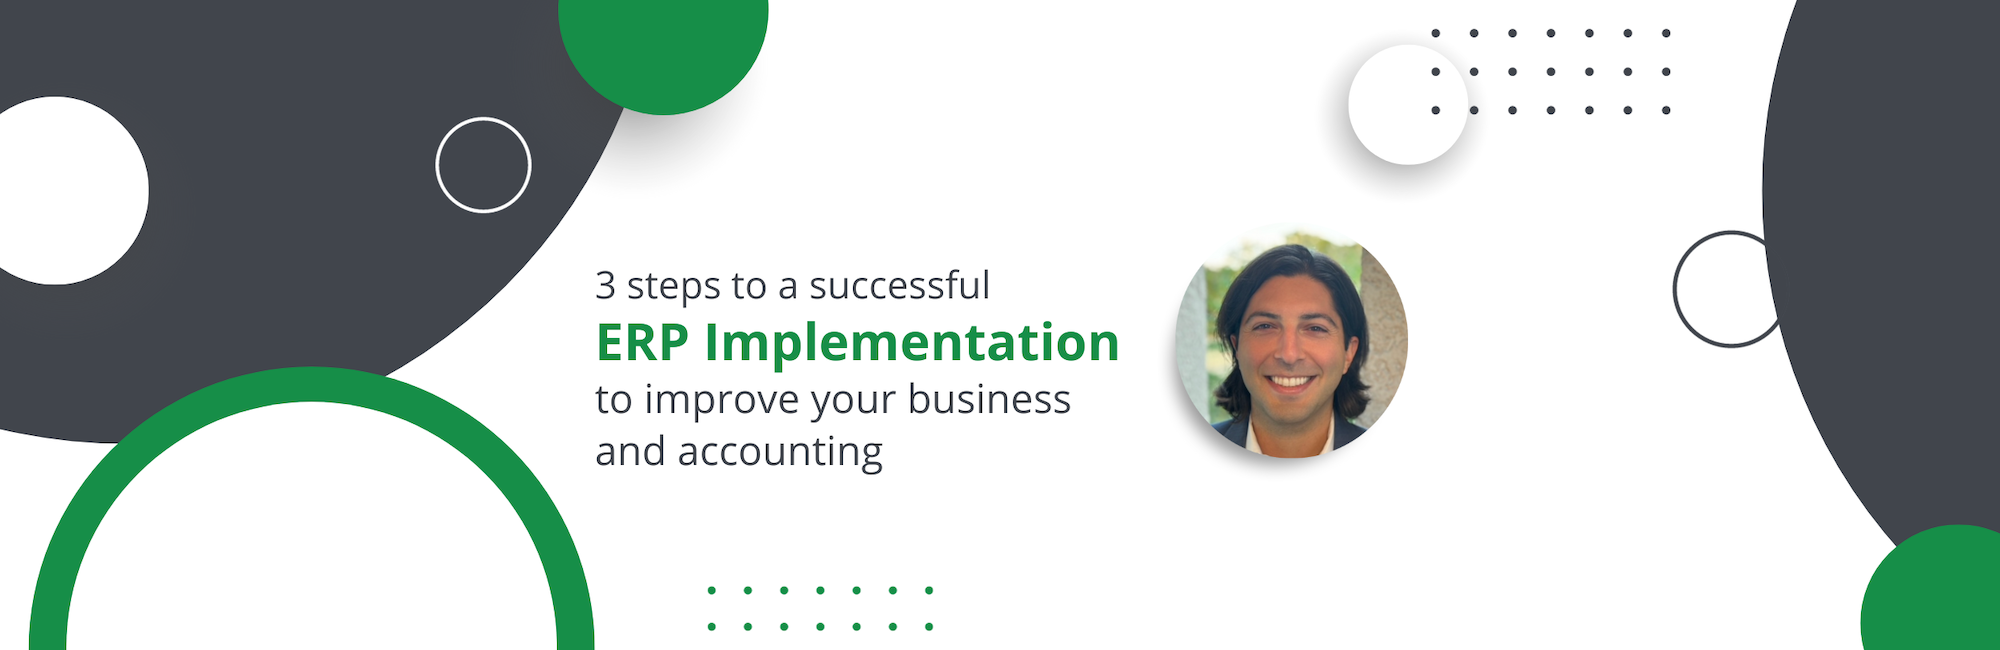 Chris Ciani shares tips for ERP Implementation